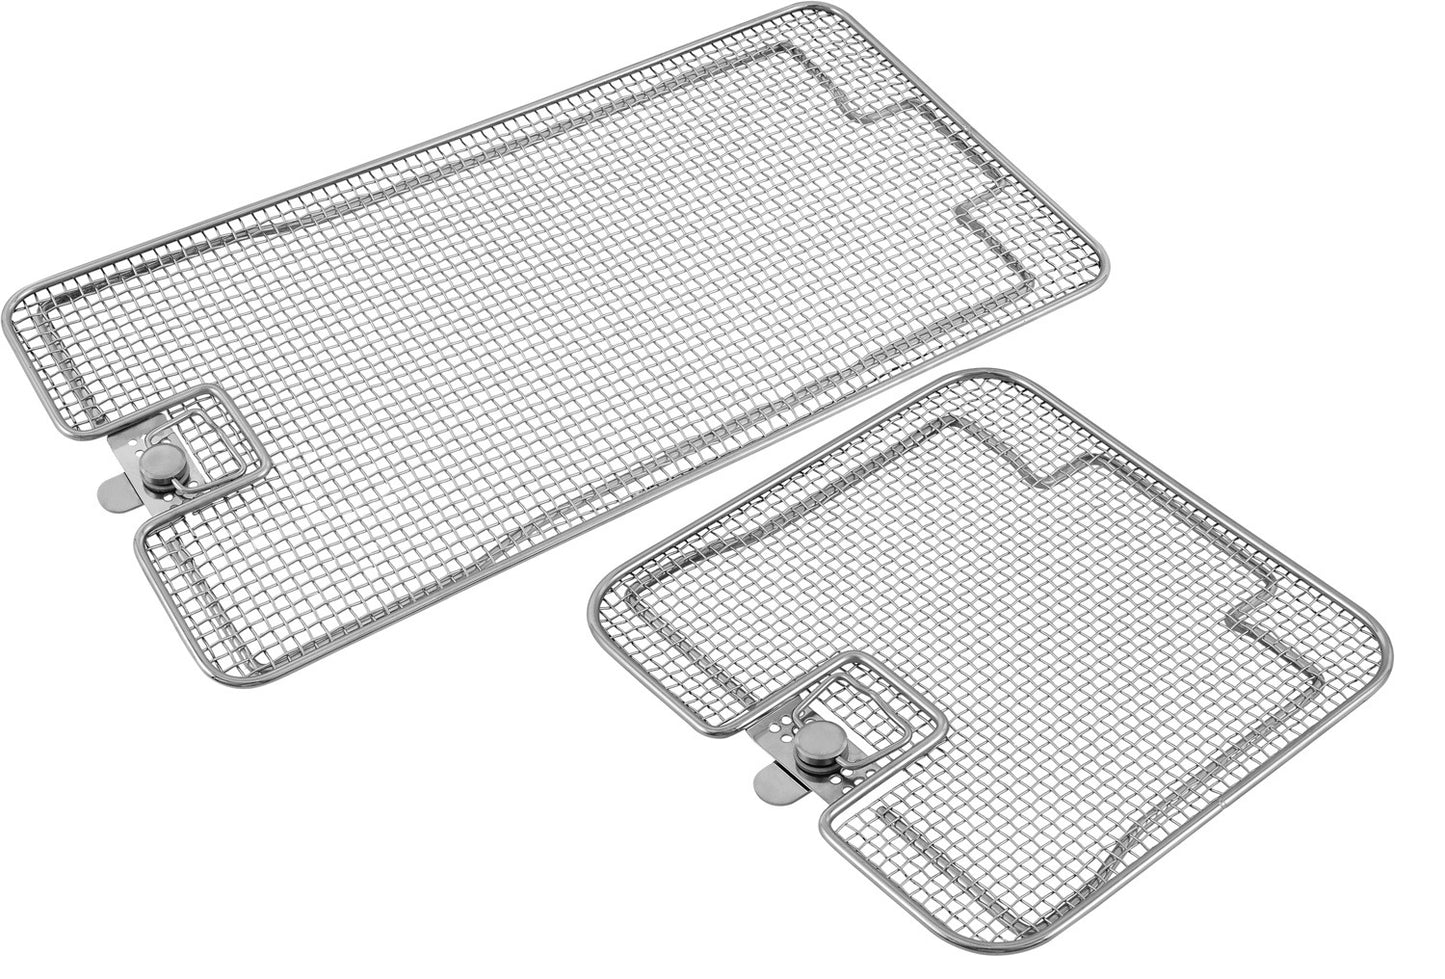 Lids for Perforated Sterilization Baskets, Double Frame-WP-4643D